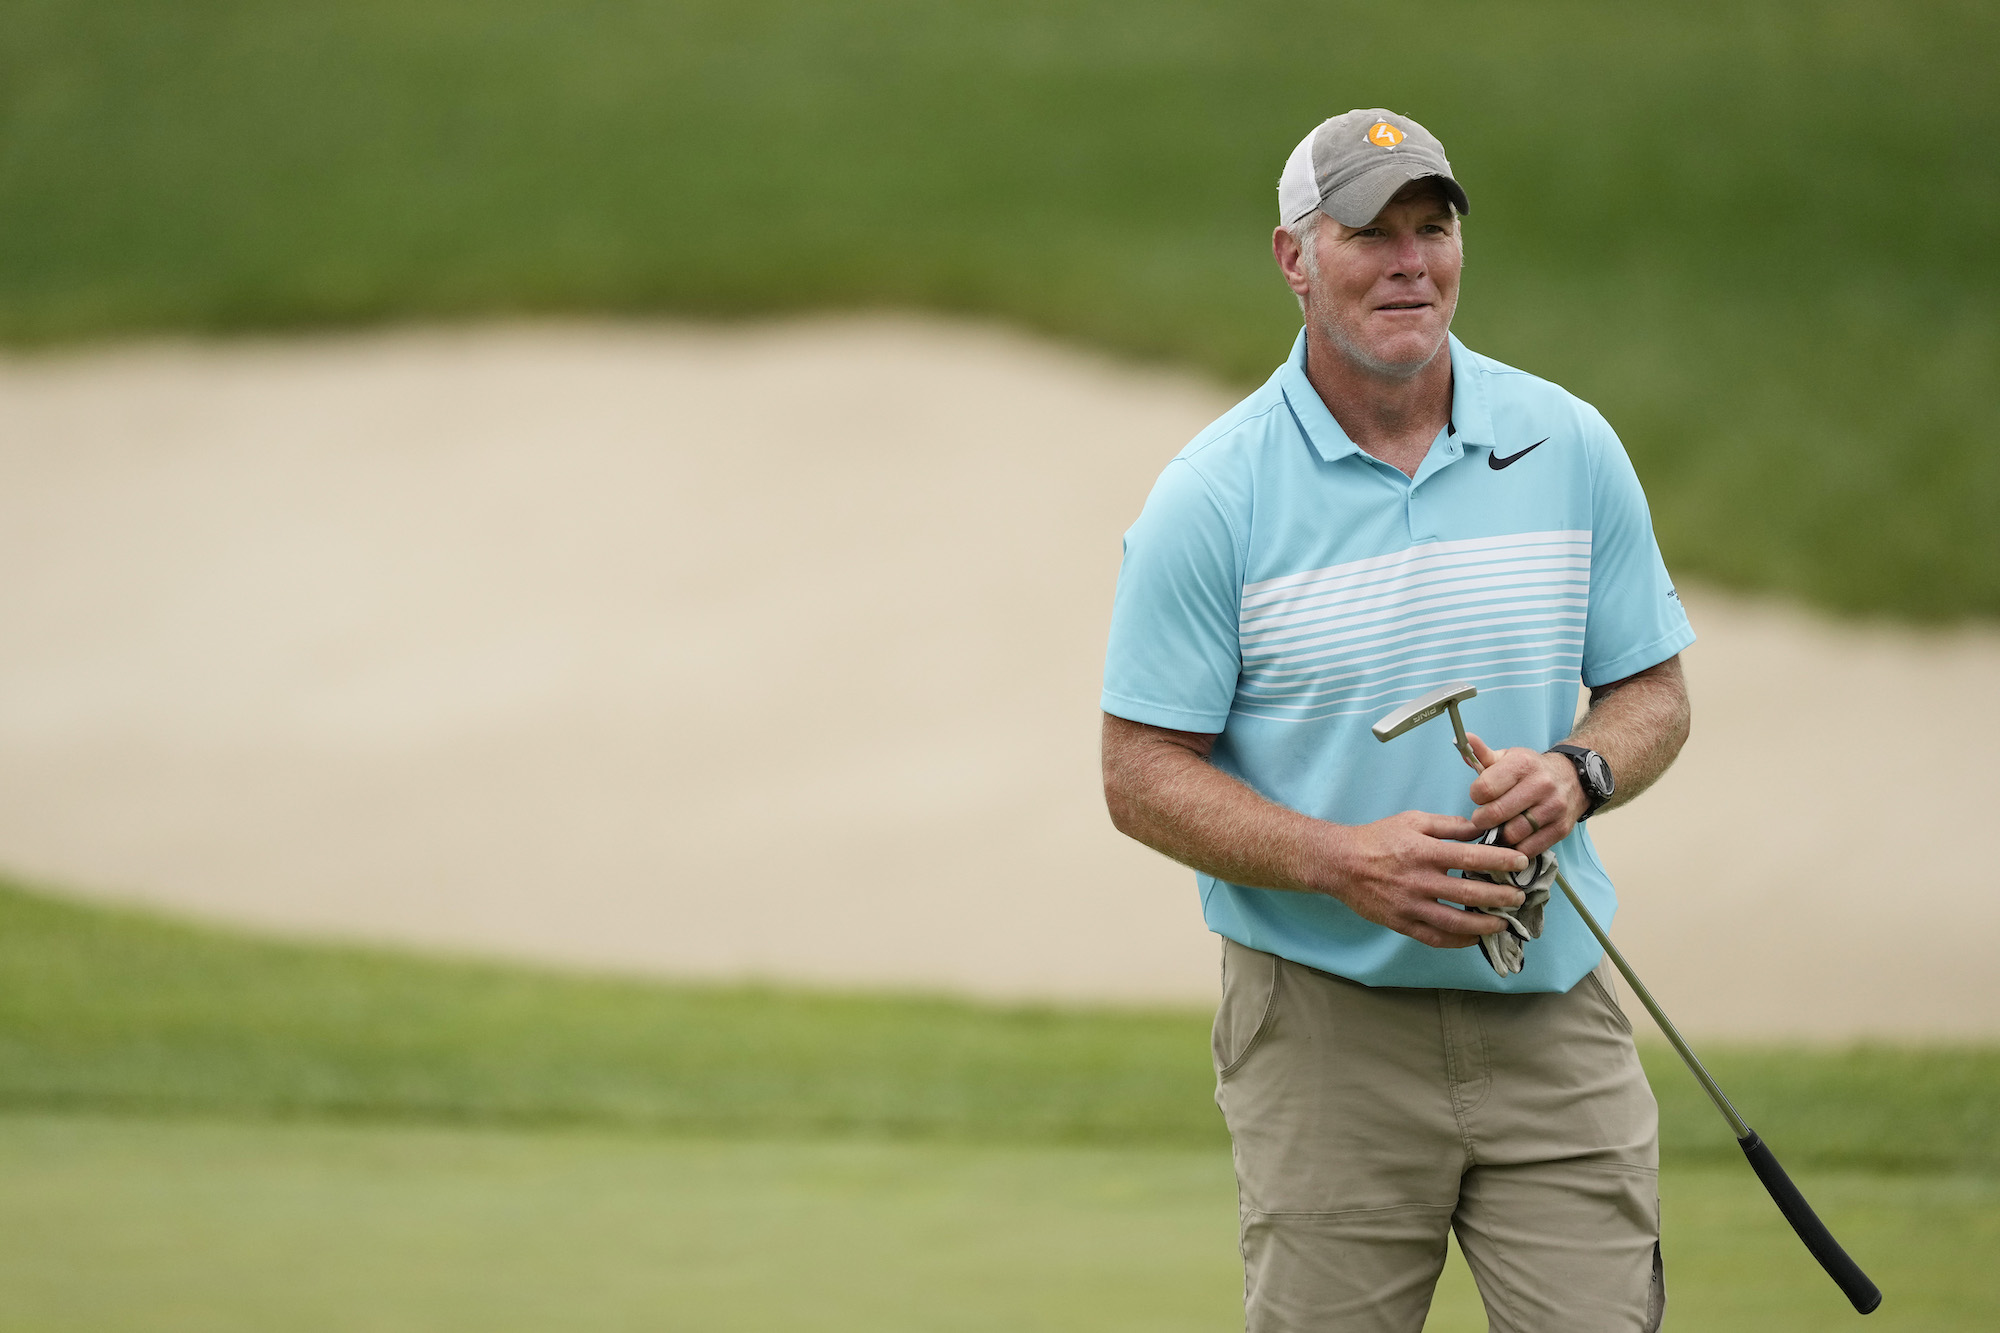 MADISON, WISCONSIN - JUNE 11: Former NFL player Brett Favre stands on the 14th green during the Celebrity Foursome at the second round of the American Family Insurance Championship at University Ridge Golf Club on June 11, 2022 in Madison, Wisconsin. (Photo by Patrick McDermott/Getty Images)